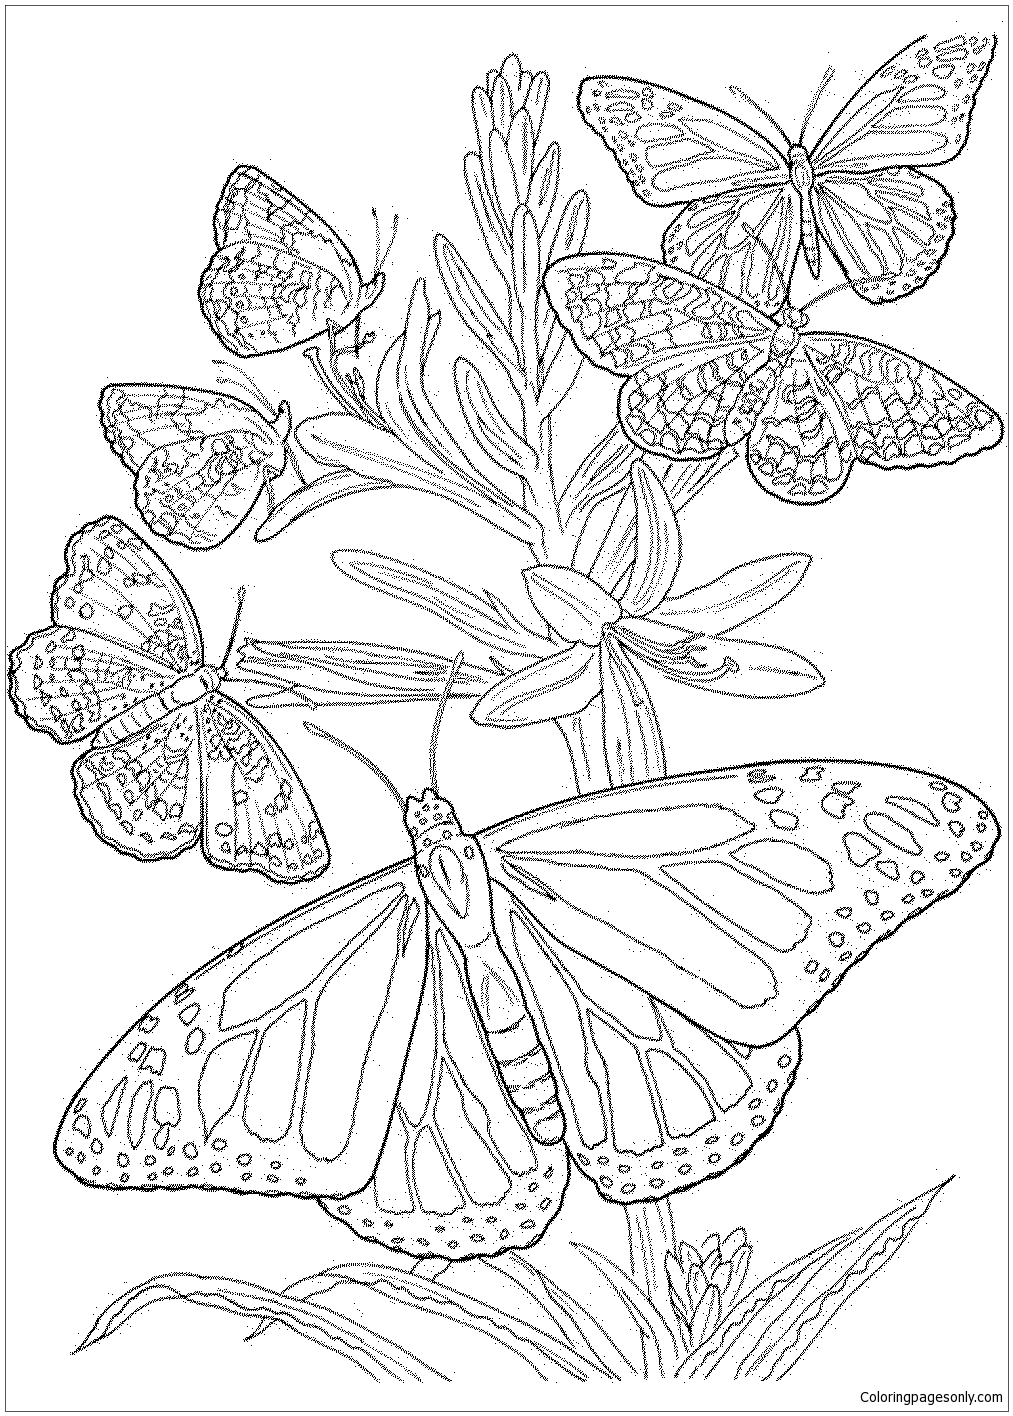 Butterfly Mandala 20 Coloring Pages   Mandala Coloring Pages ...